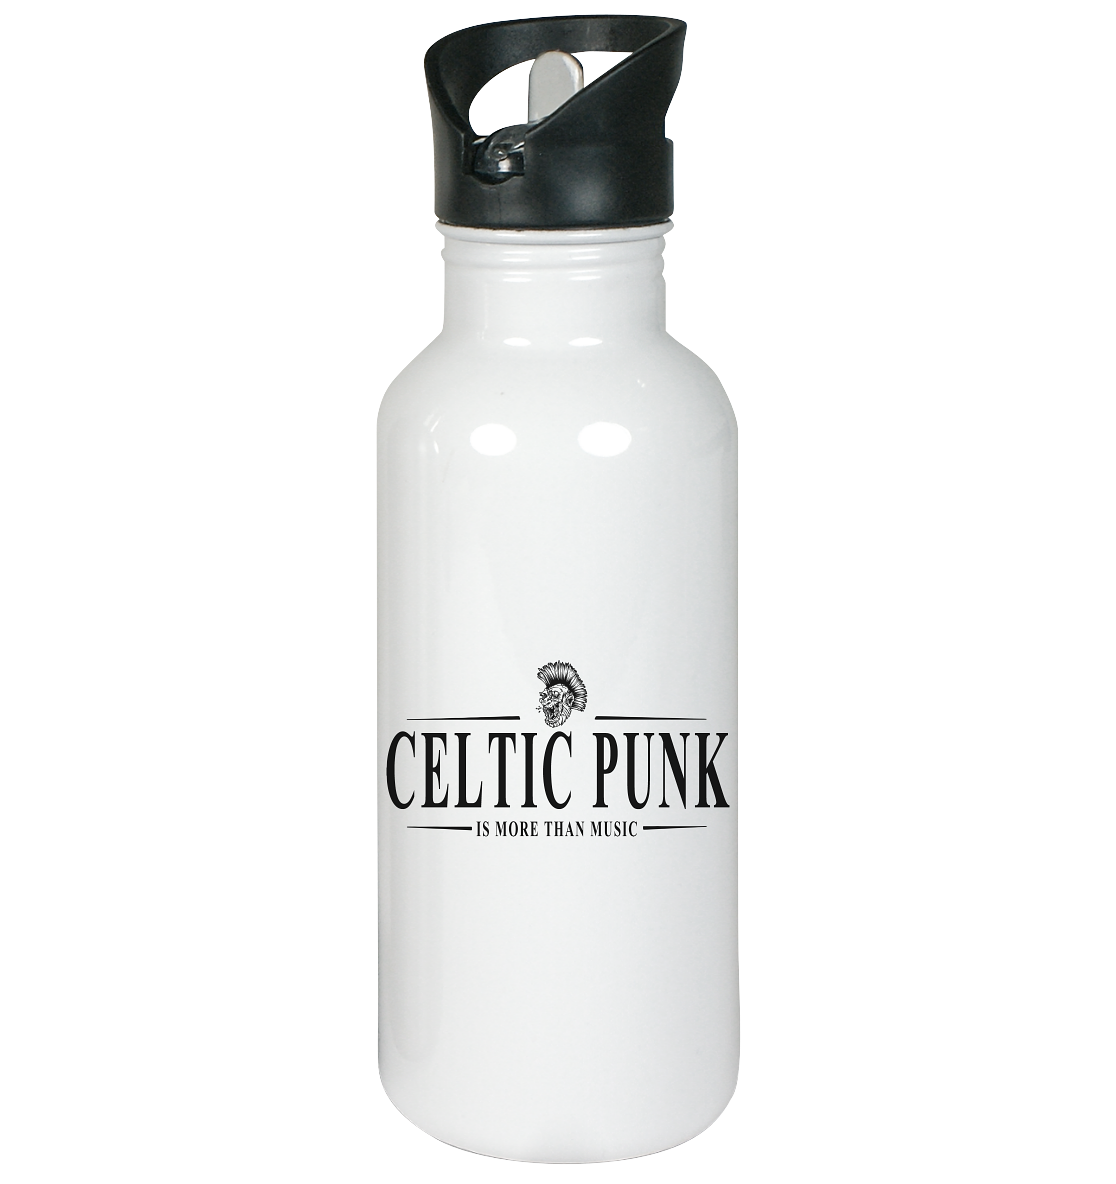 Celtic Punk "Is More Than Music" - Edelstahl-Trinkflasche